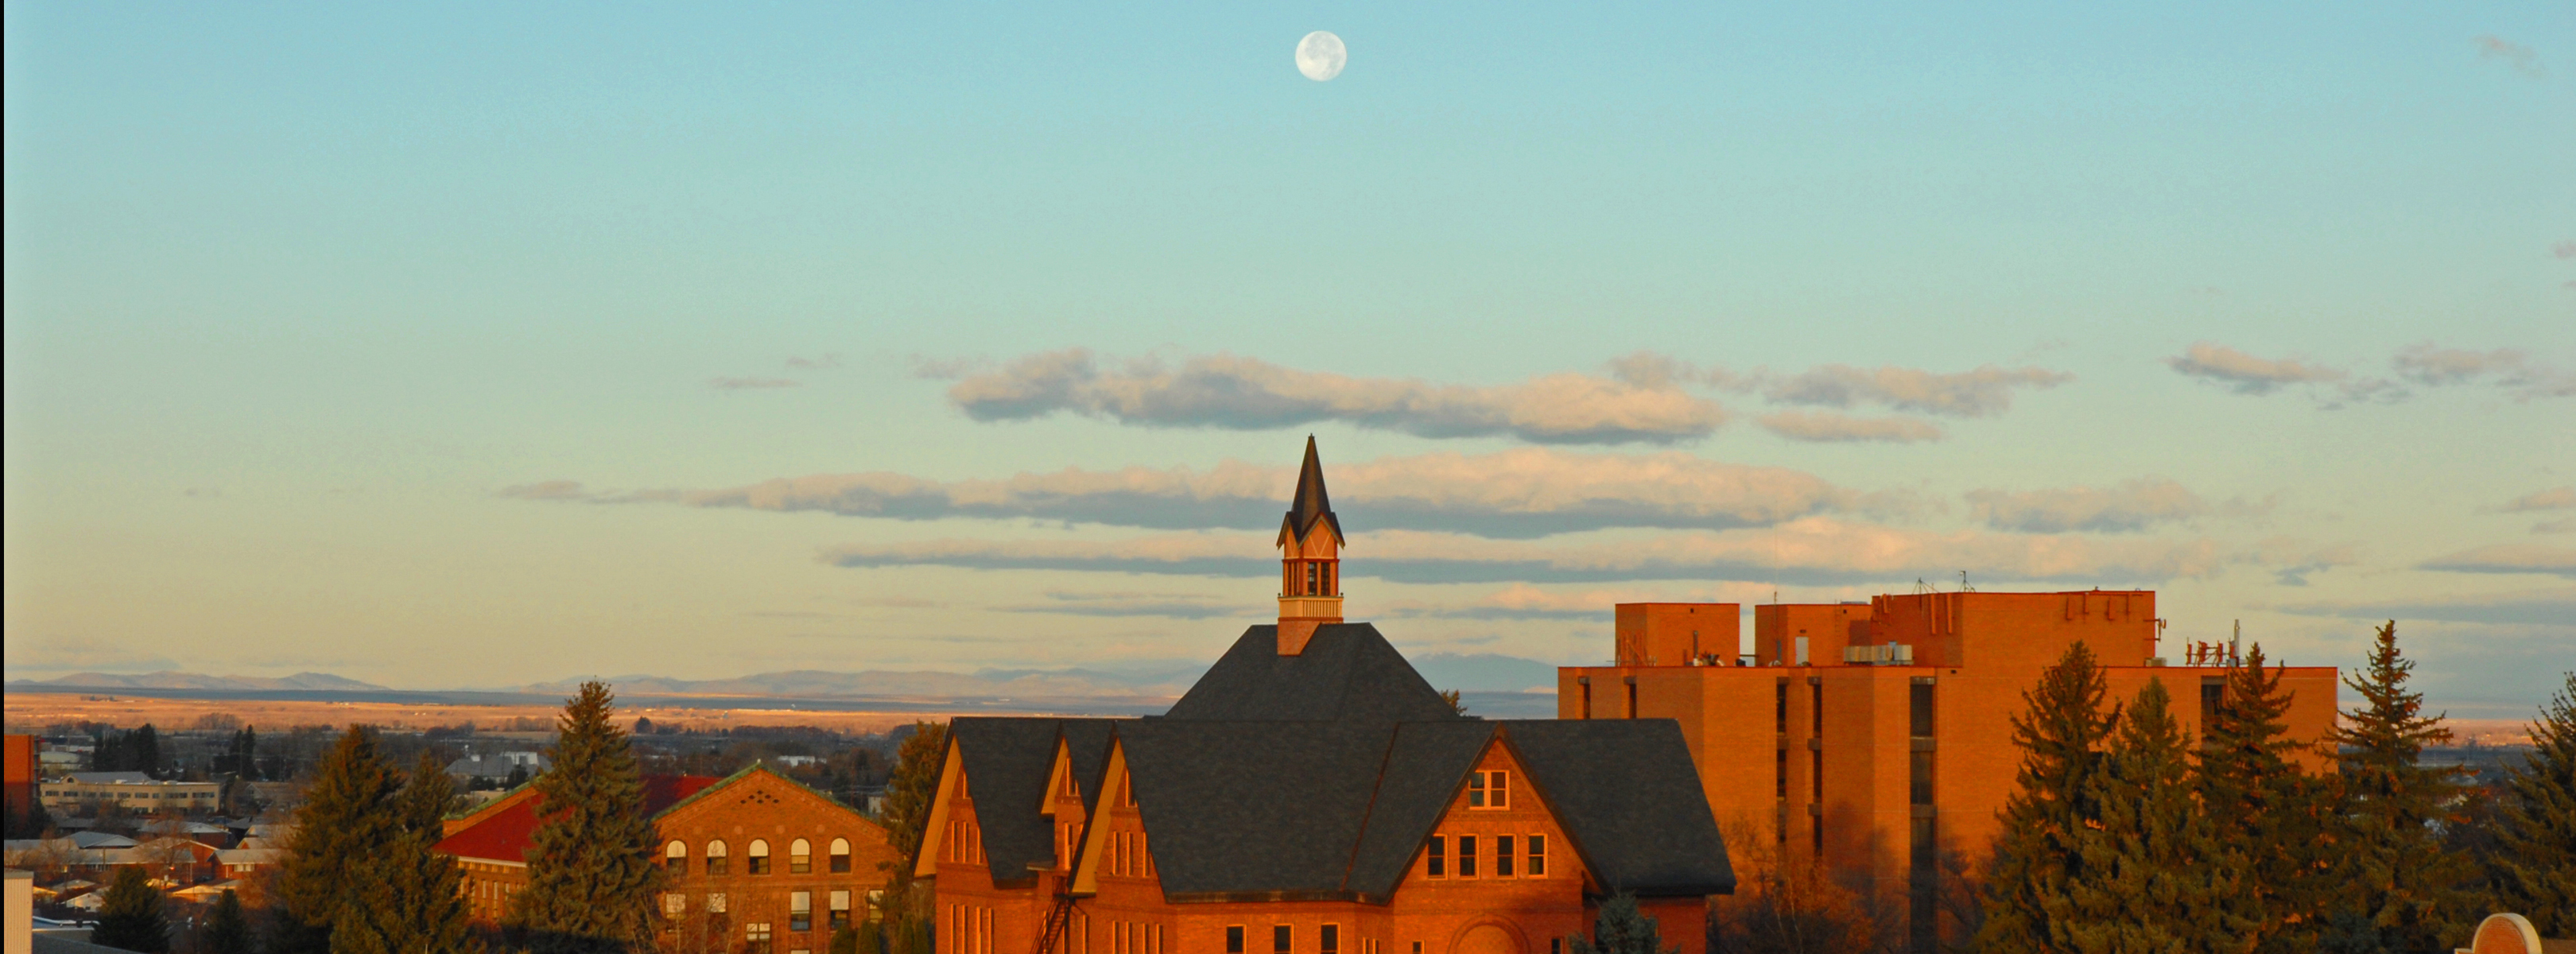 campus landscape with moon